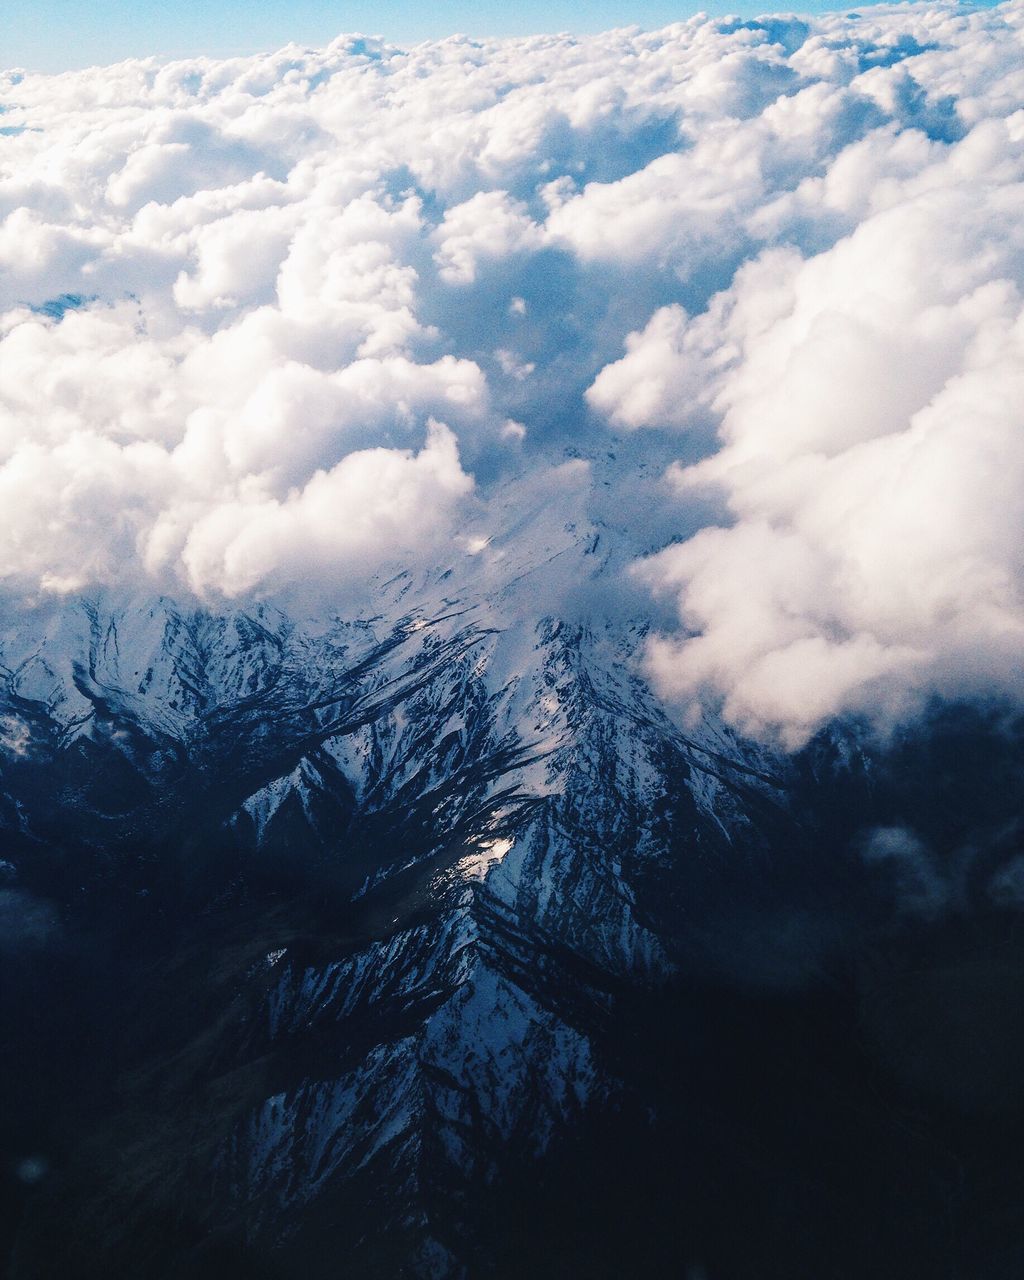 AERIAL VIEW OF CLOUDS OVER SNOW